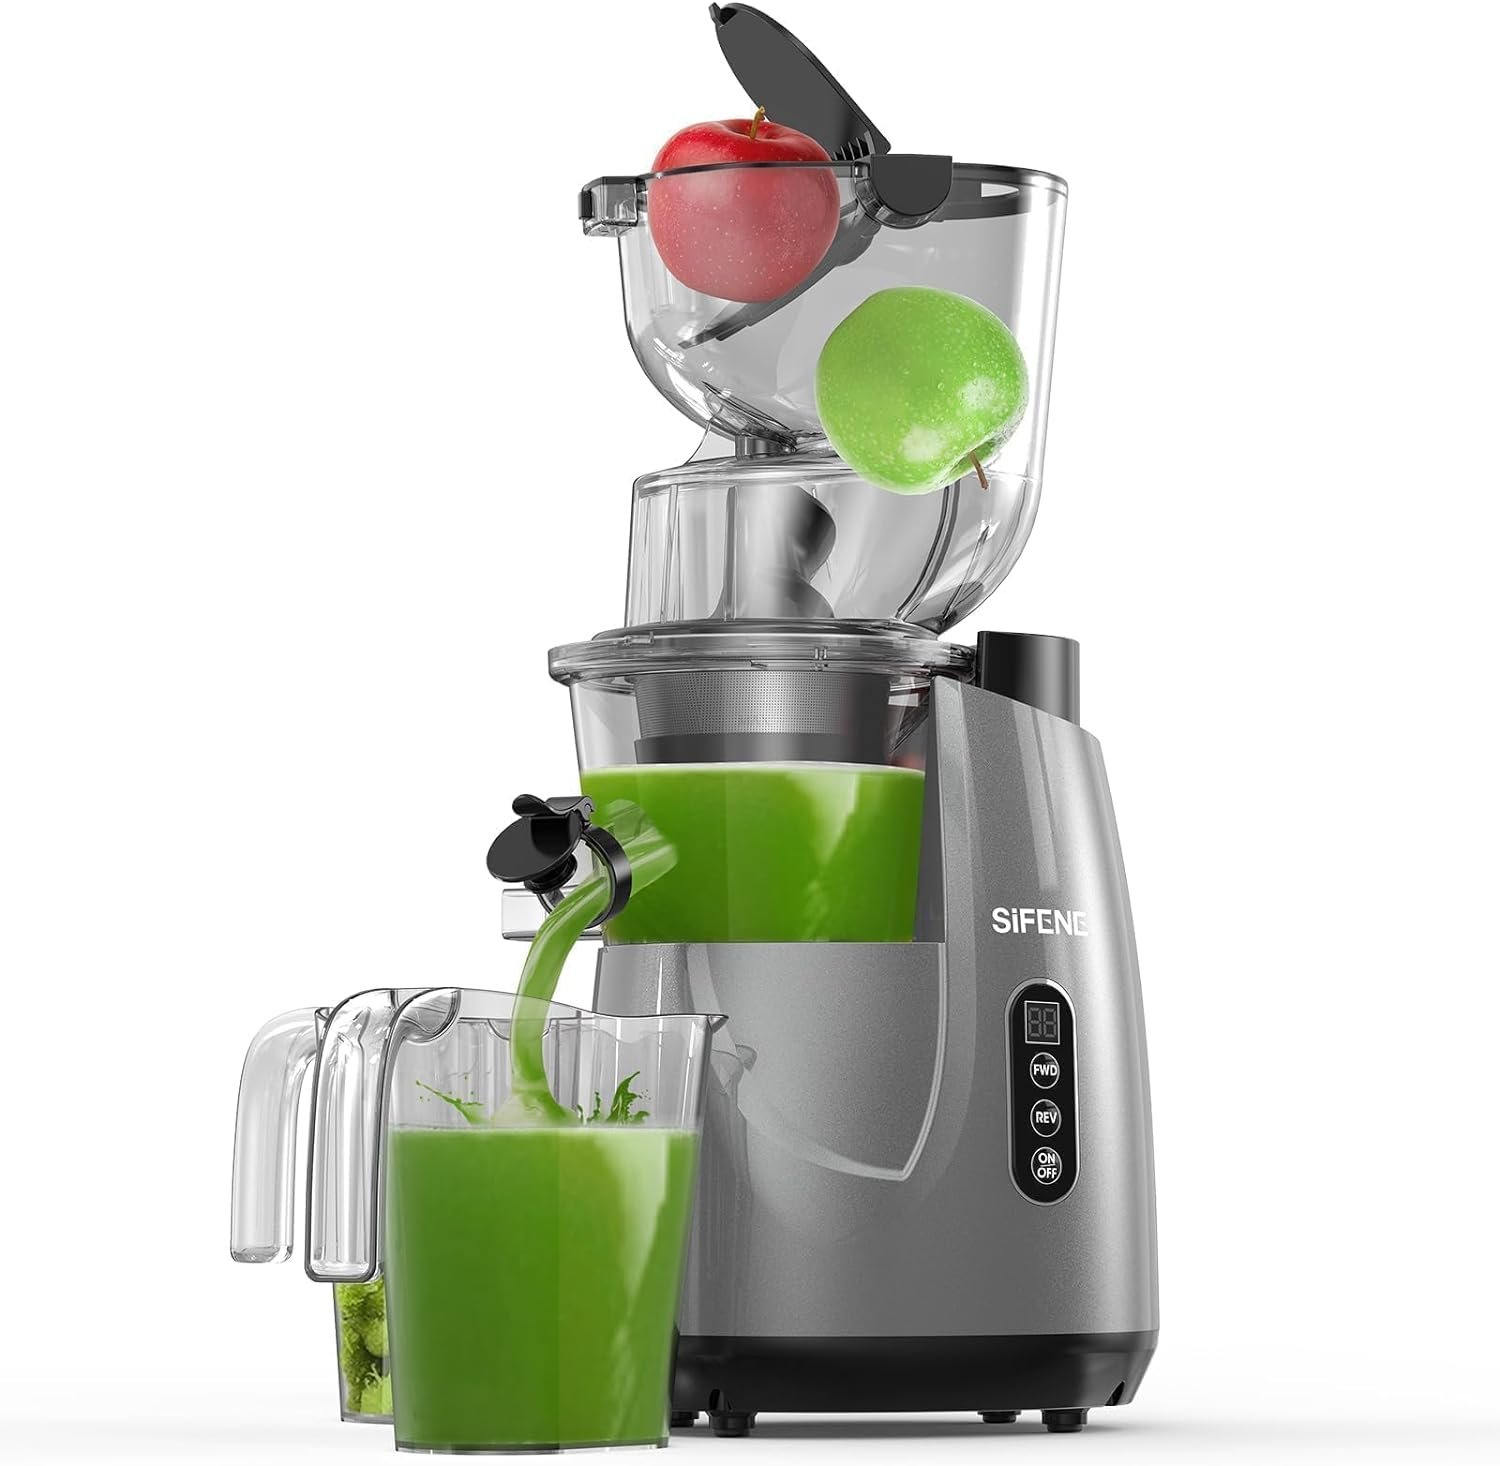 SiFENE Whole Fruit Cold Press Juicer Machine - Vertical Slow Masticating Juicer with Large 3.3in Feed Chute - Easy to Clean, Ideal for Whole Fruits  Vegetables, Gray